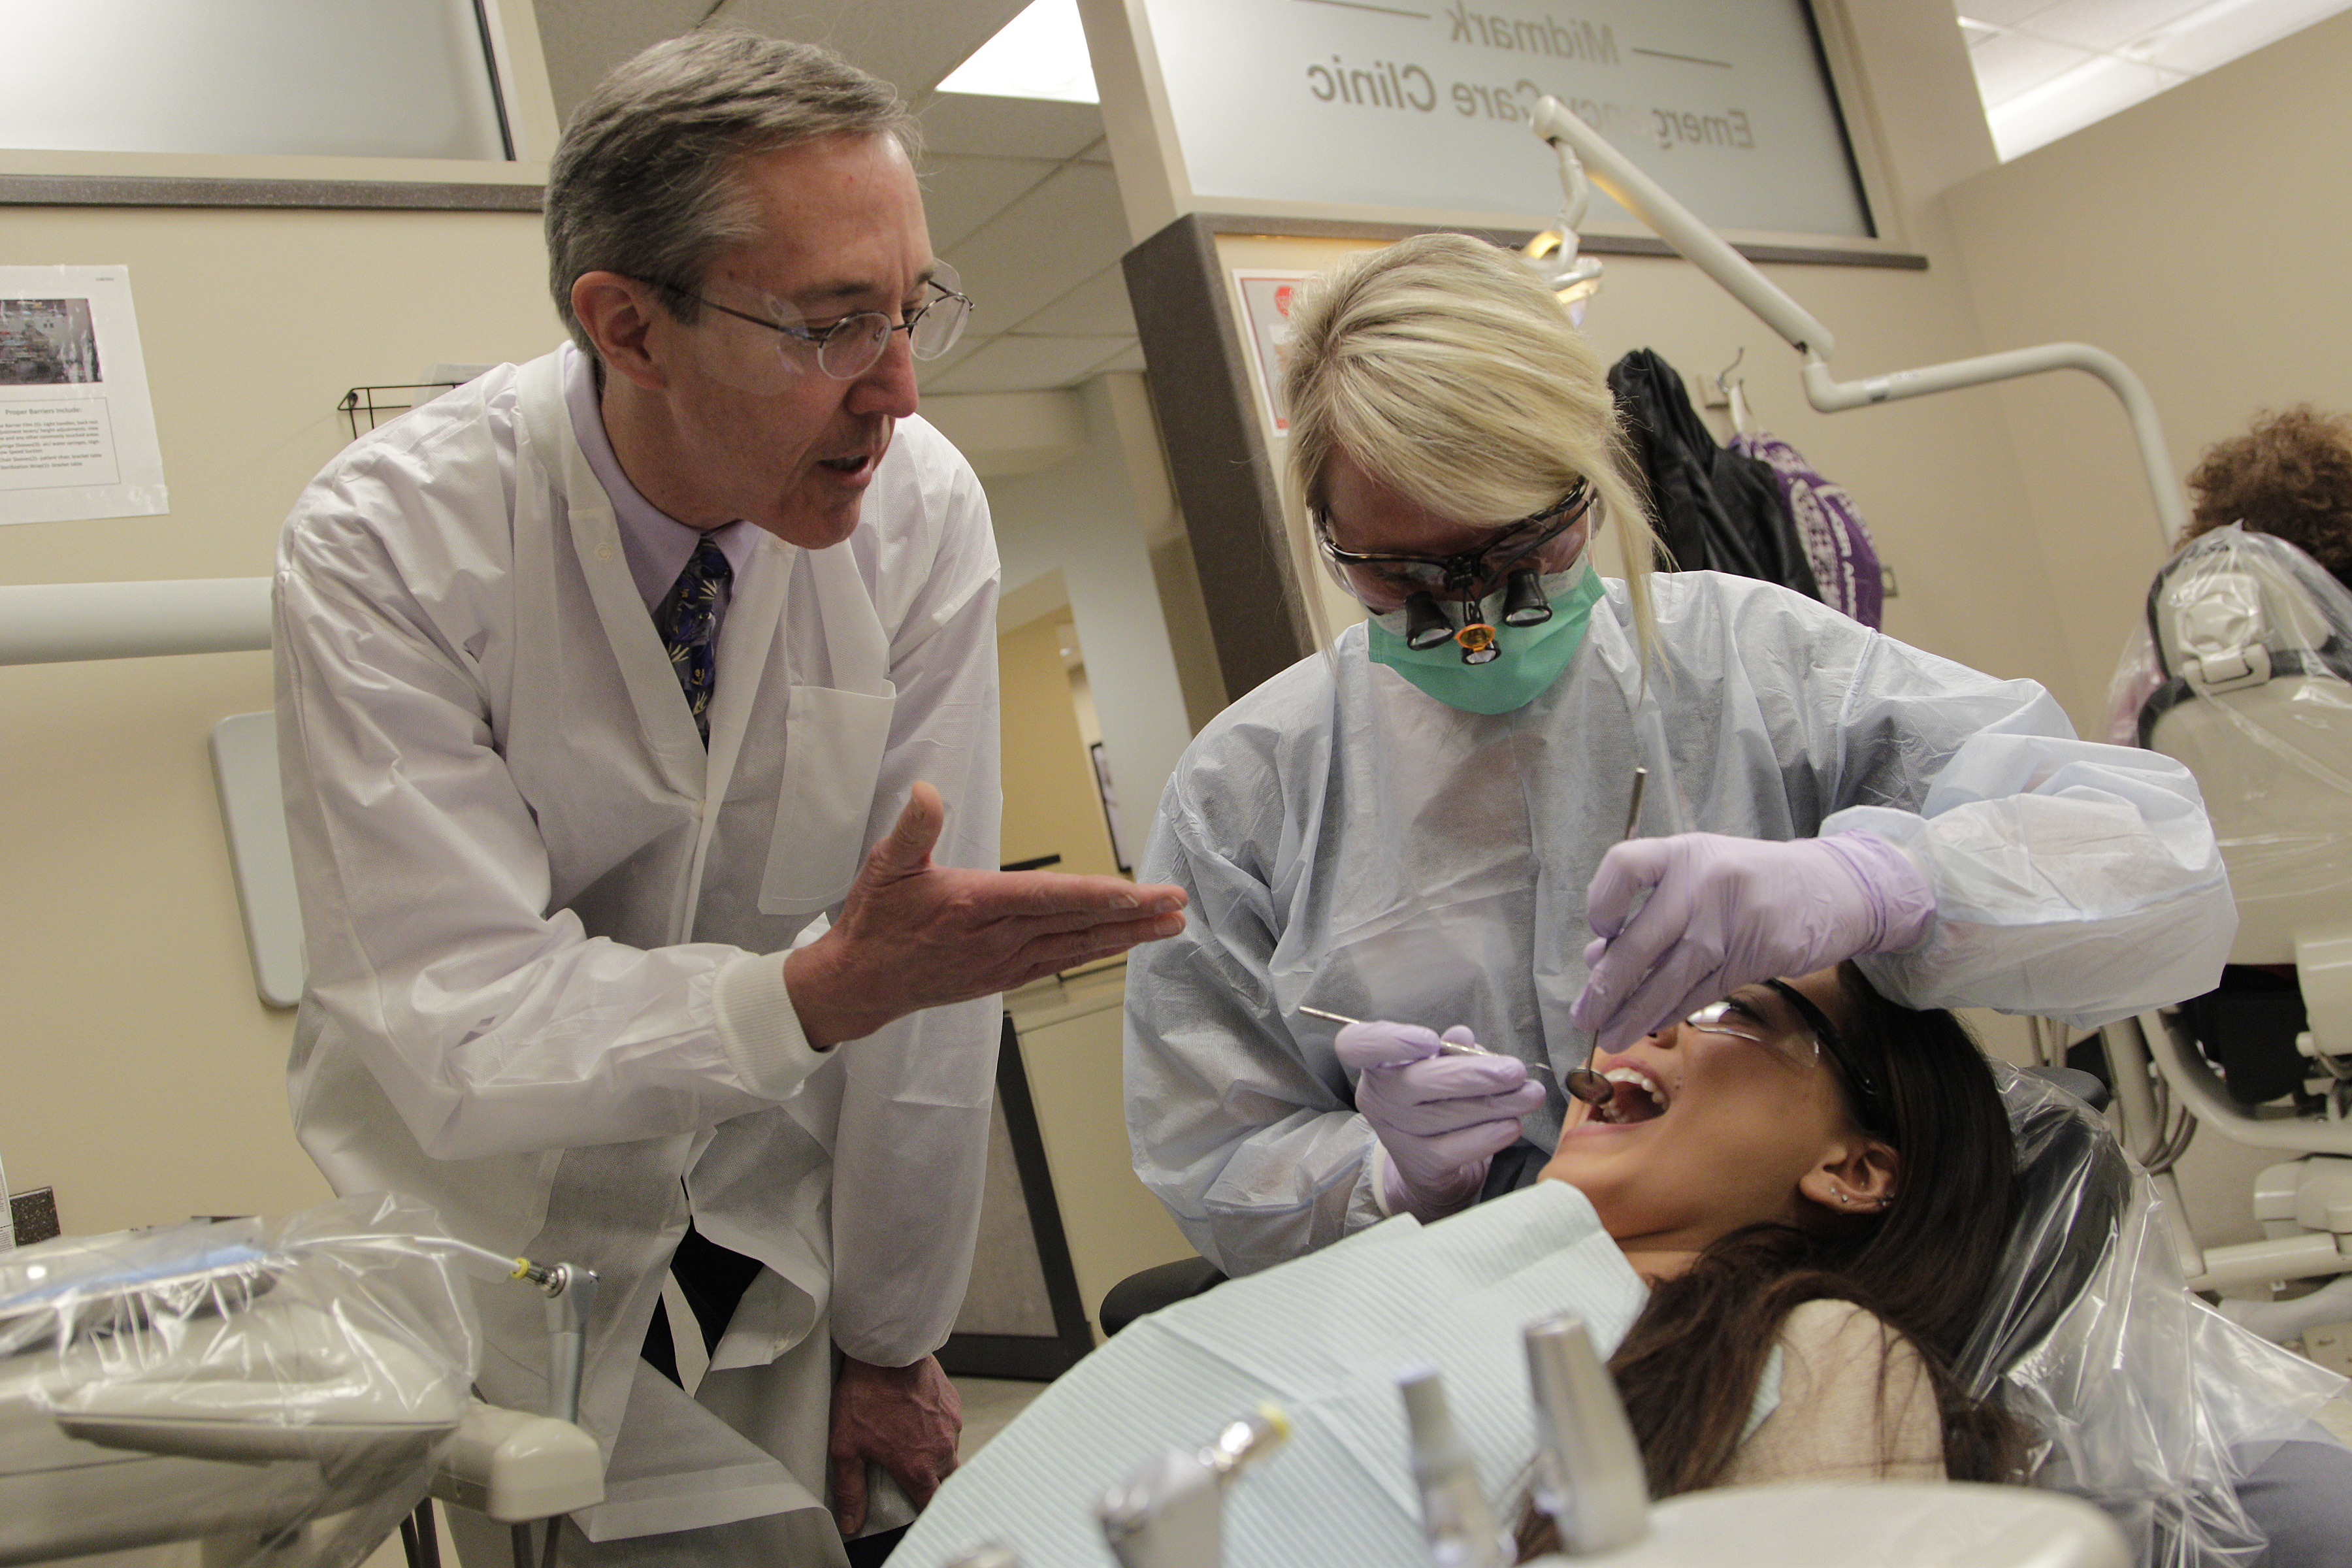 Dr. Jim Cottle, an associate professor at the OSU College of Dentistry